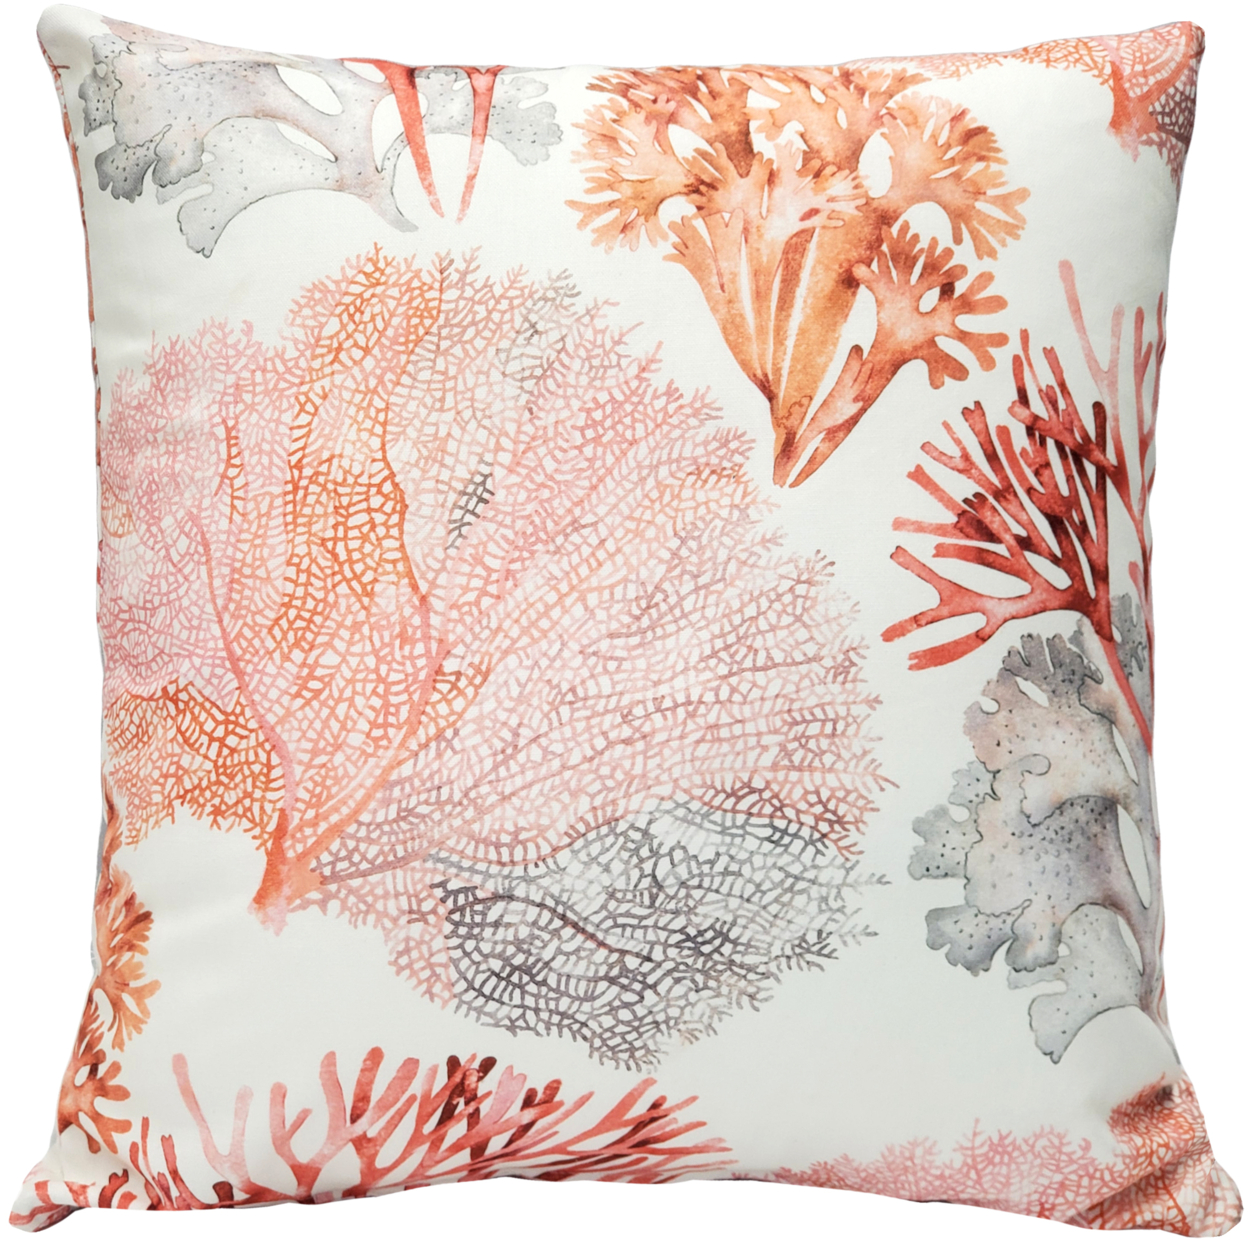 Tiger Beach Pink Coral Throw Pillow 21x21 Inches Square, Complete Pillow With Polyfill Pillow Insert